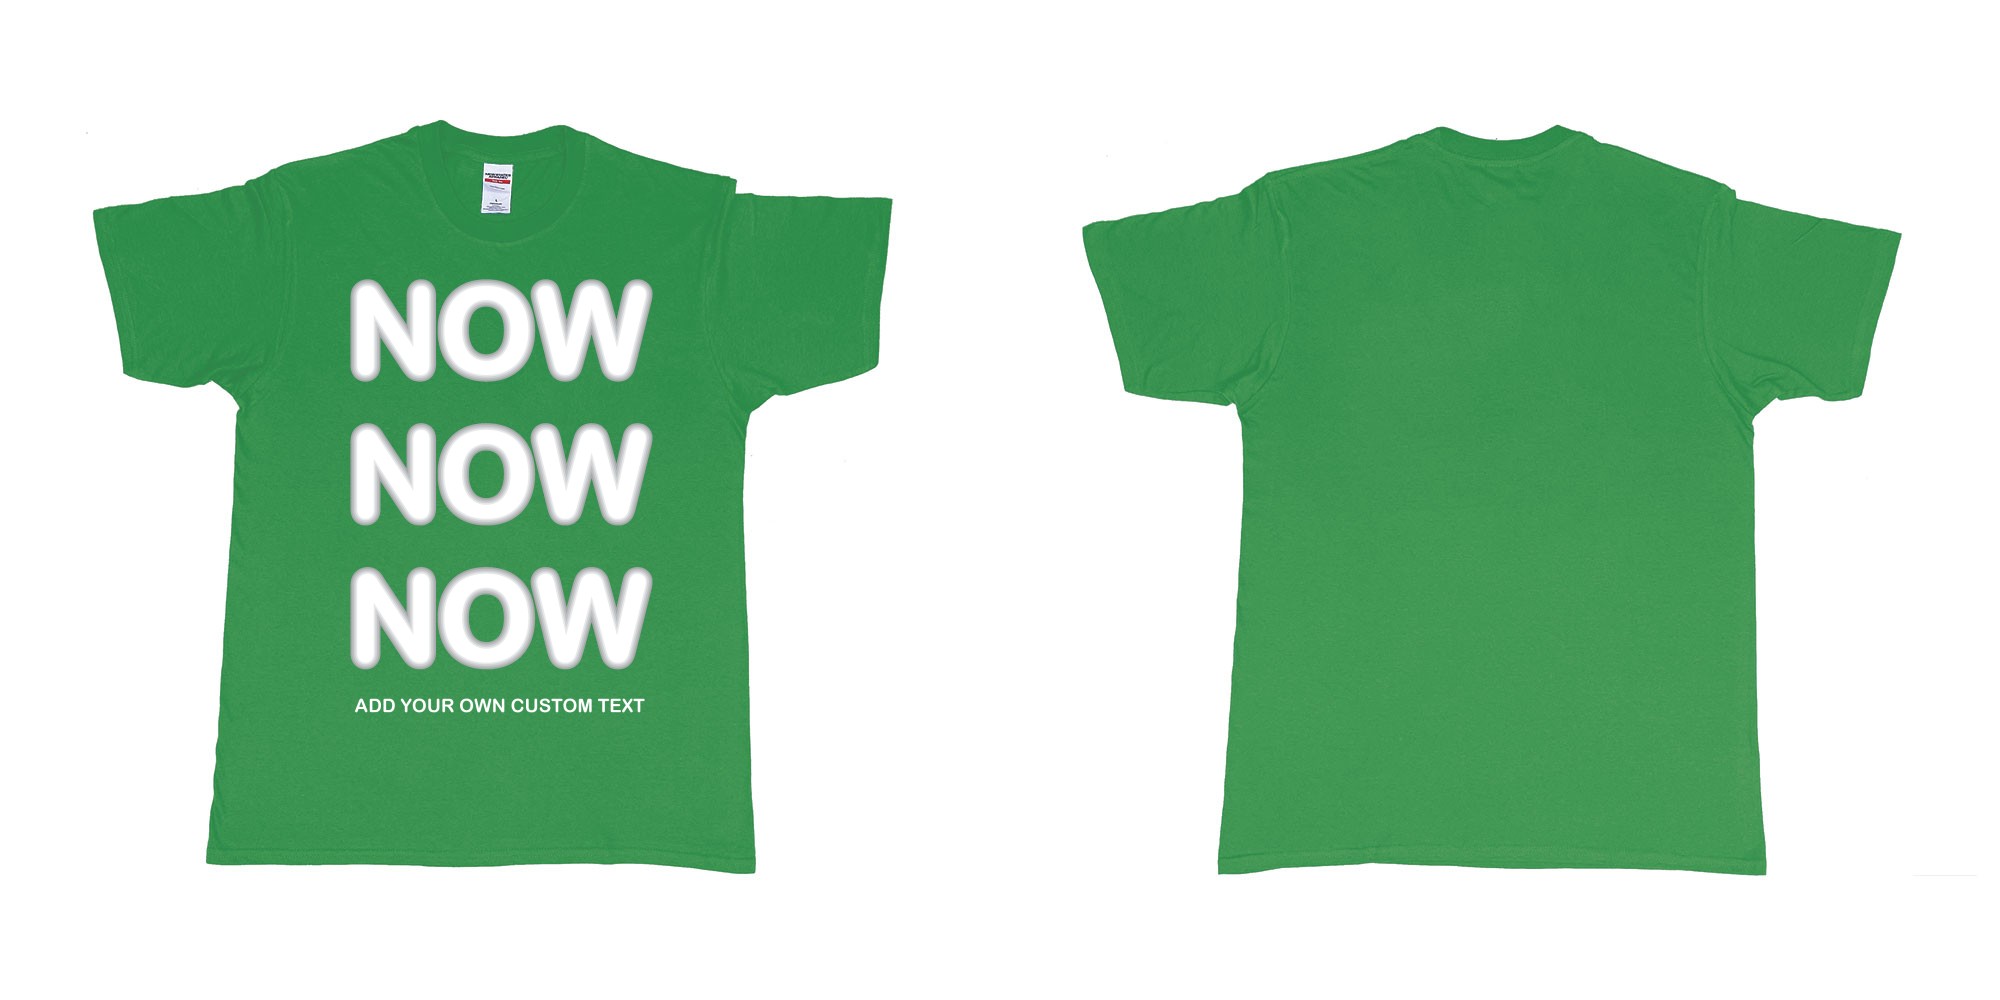 Custom tshirt design now now now add custom text tees in fabric color irish-green choice your own text made in Bali by The Pirate Way